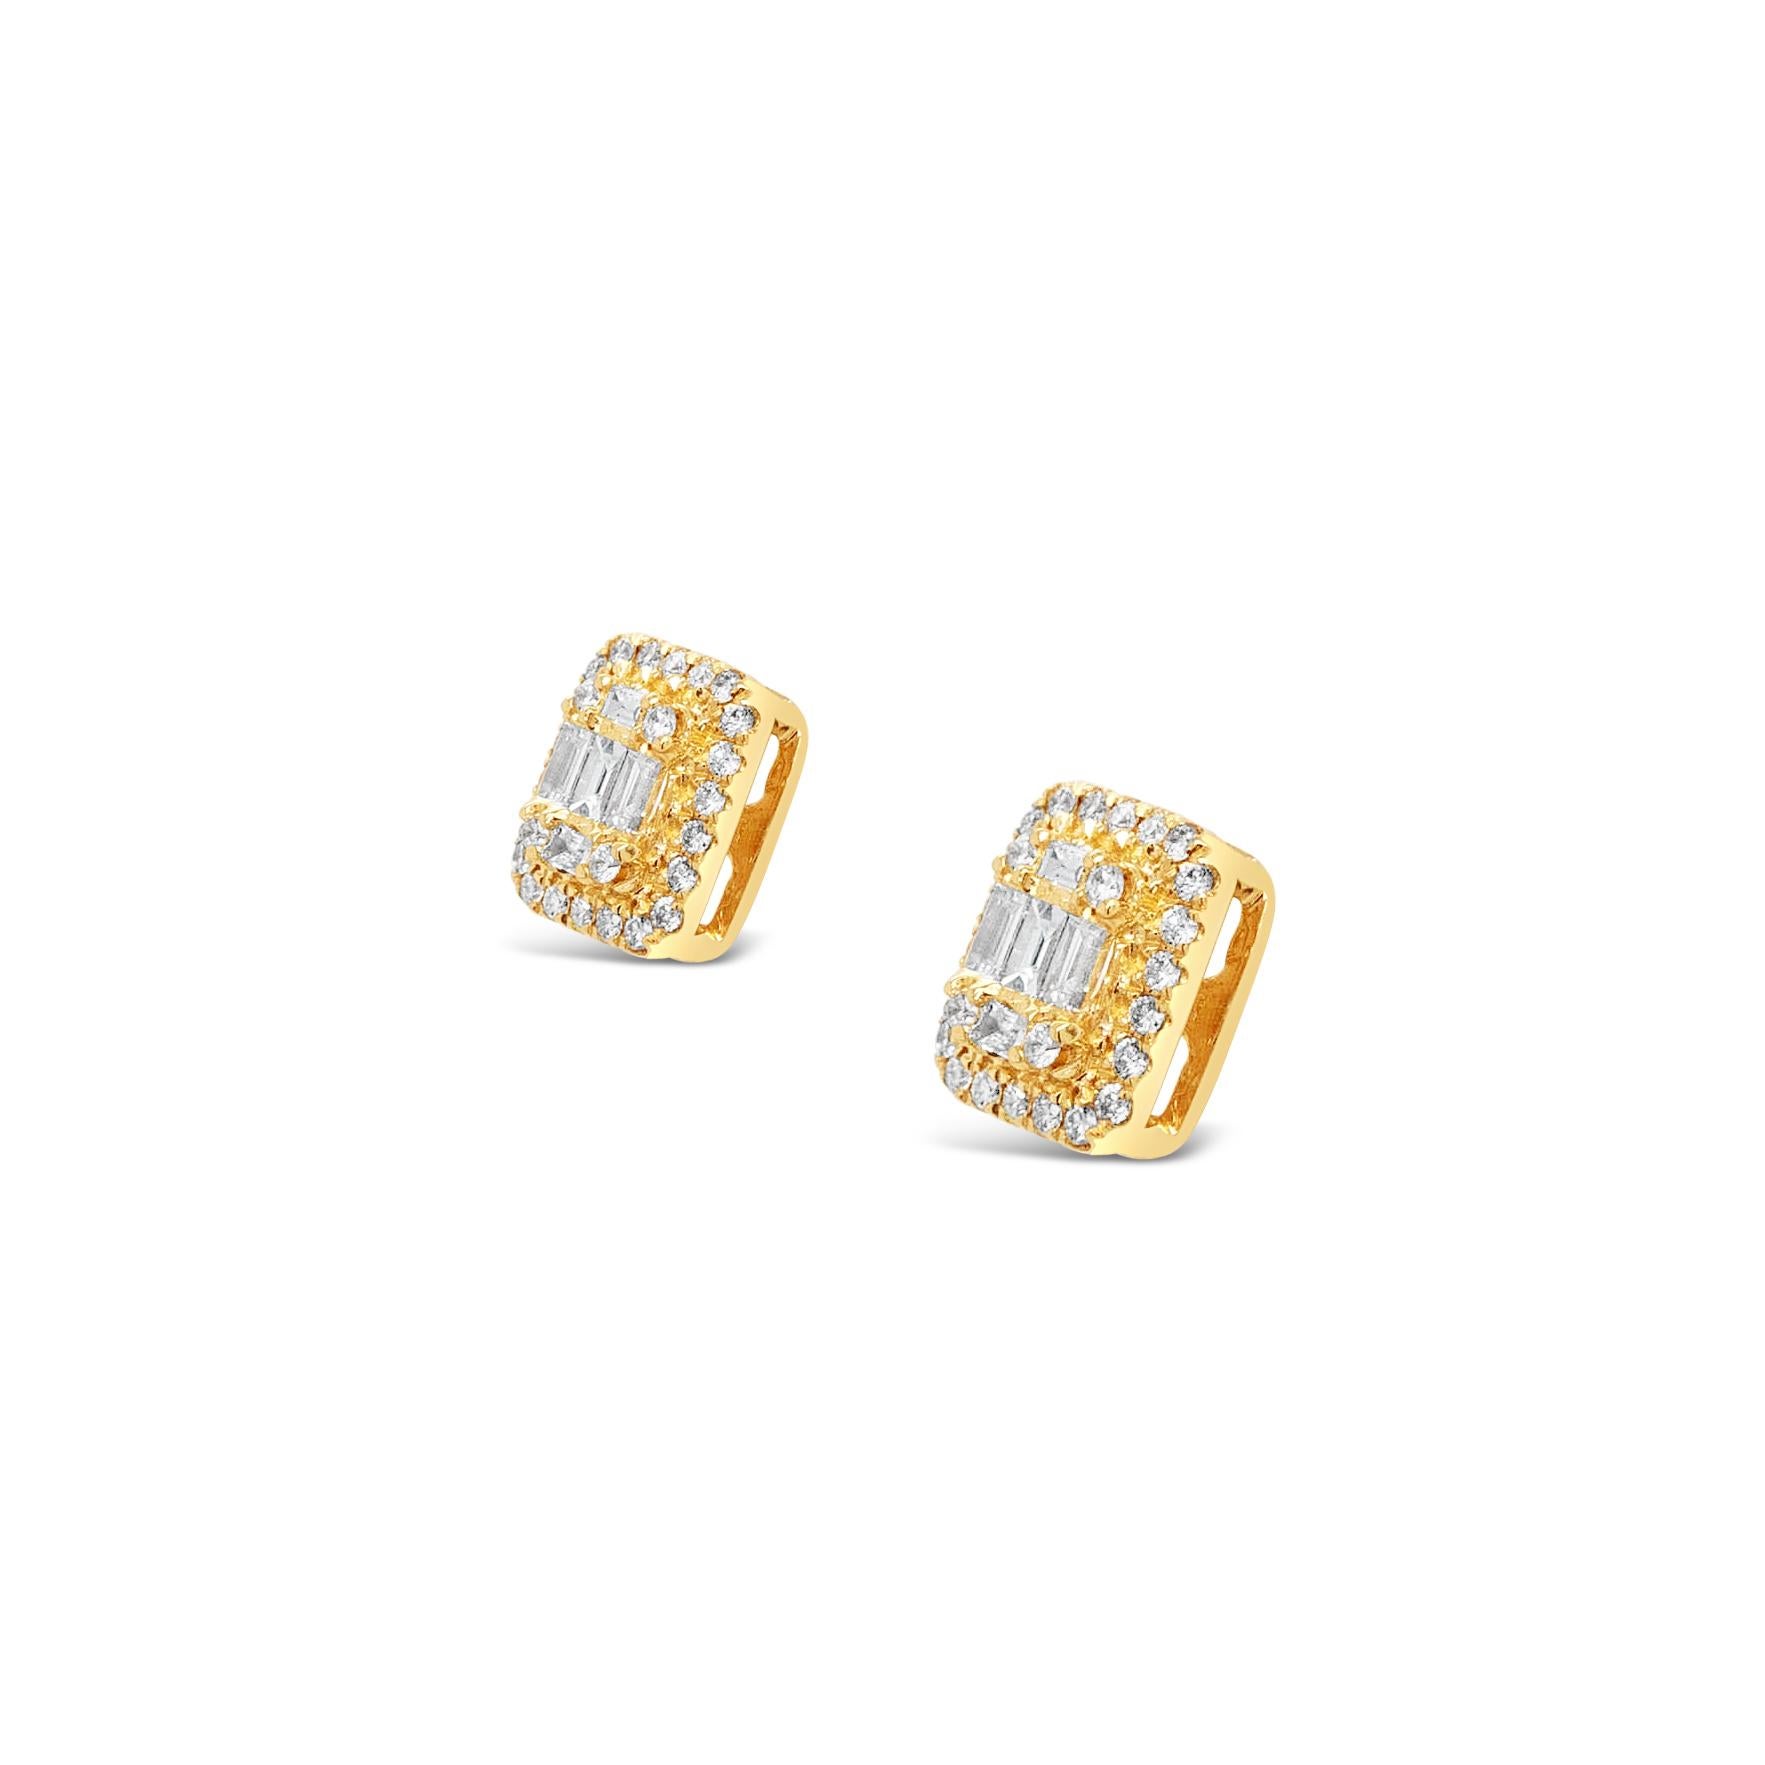 Many of our items include UK VAT at 20%. This means we may be able to remove this when you are purchasing from outside of the UK. Please message us if you would like to know about a specific item.
Material: 18ct Yellow Gold
Stud Height: 6mm
Total